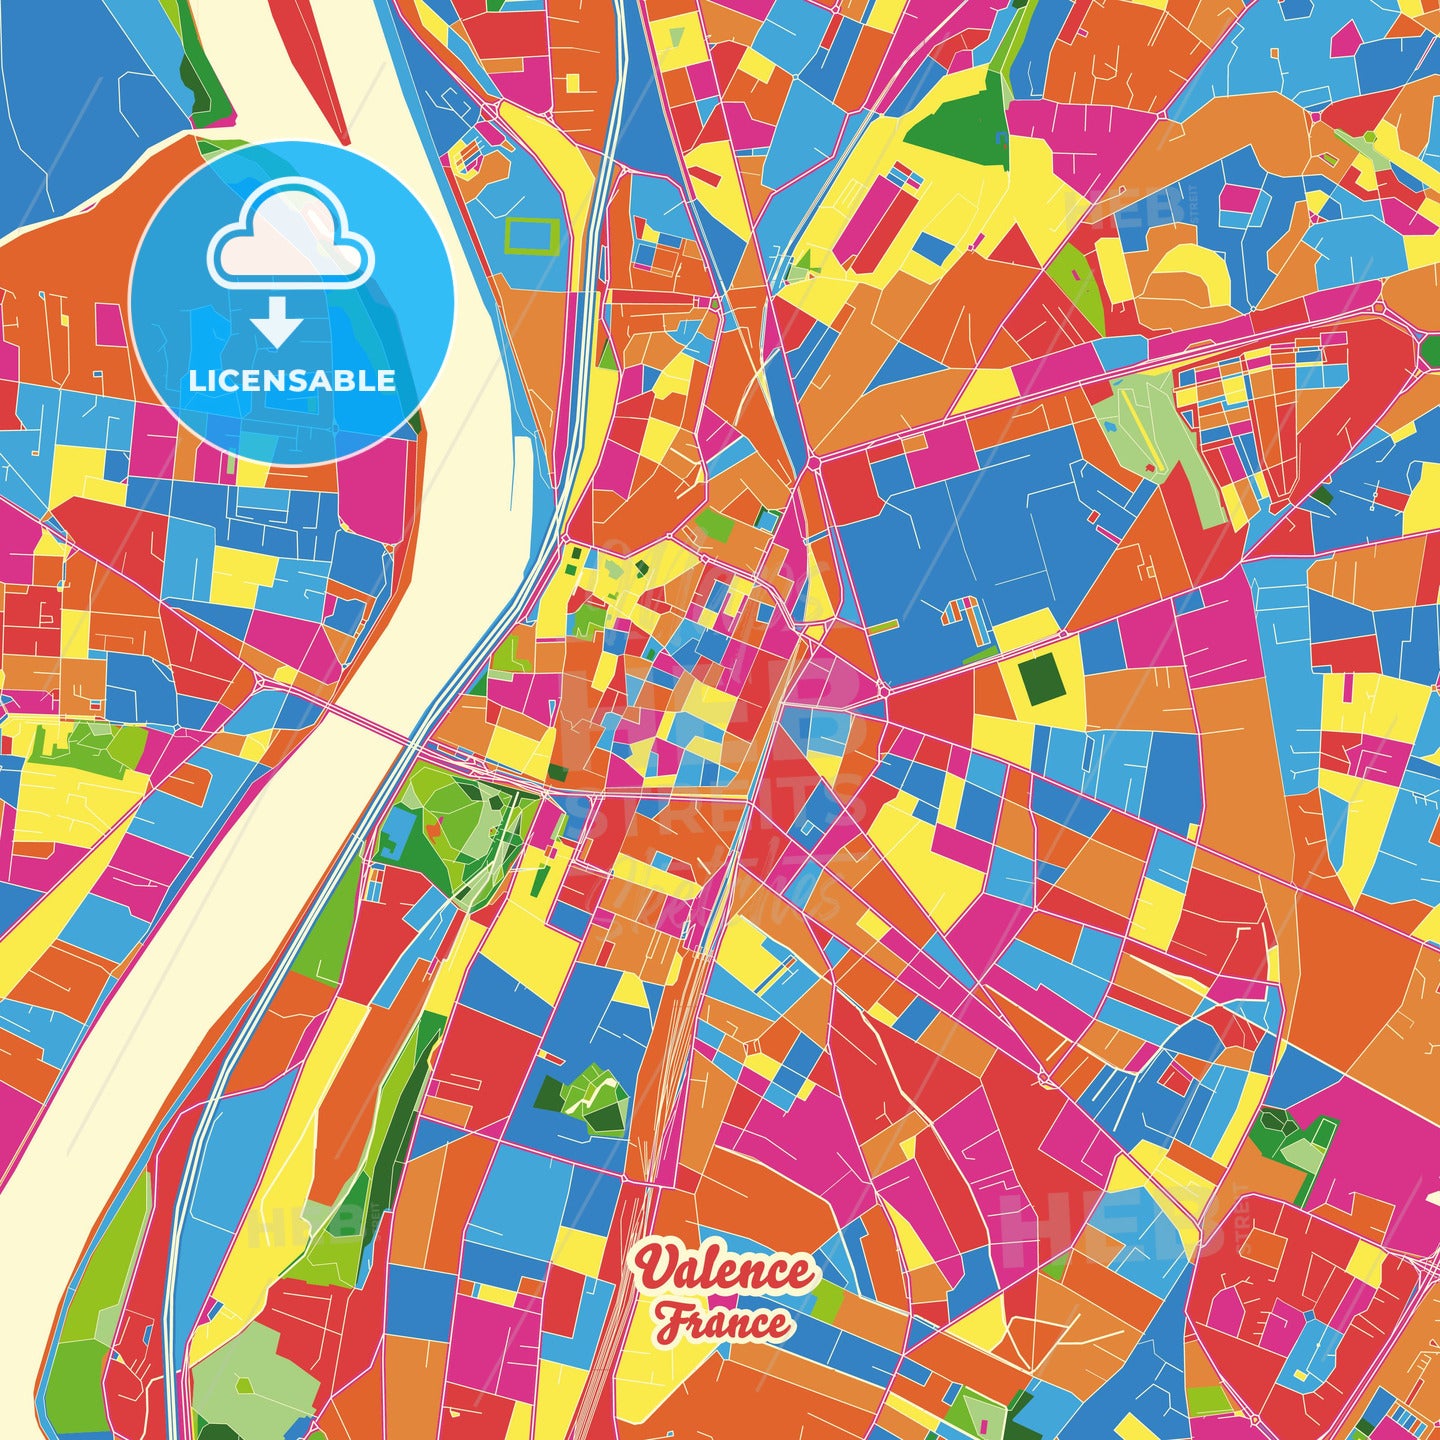 Valence, France Crazy Colorful Street Map Poster Template - HEBSTREITS Sketches